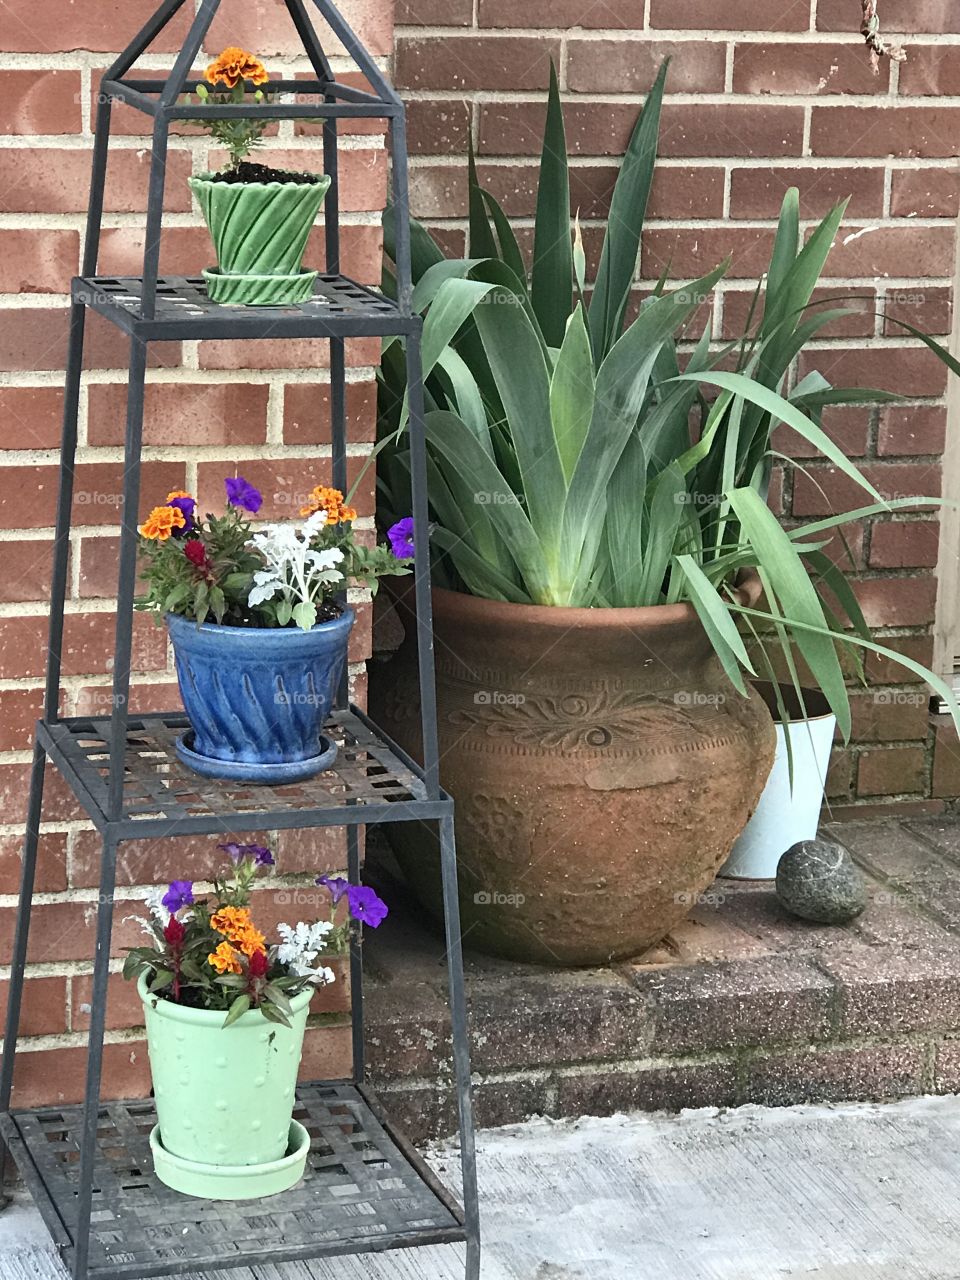 A variety of colorful potted plants.